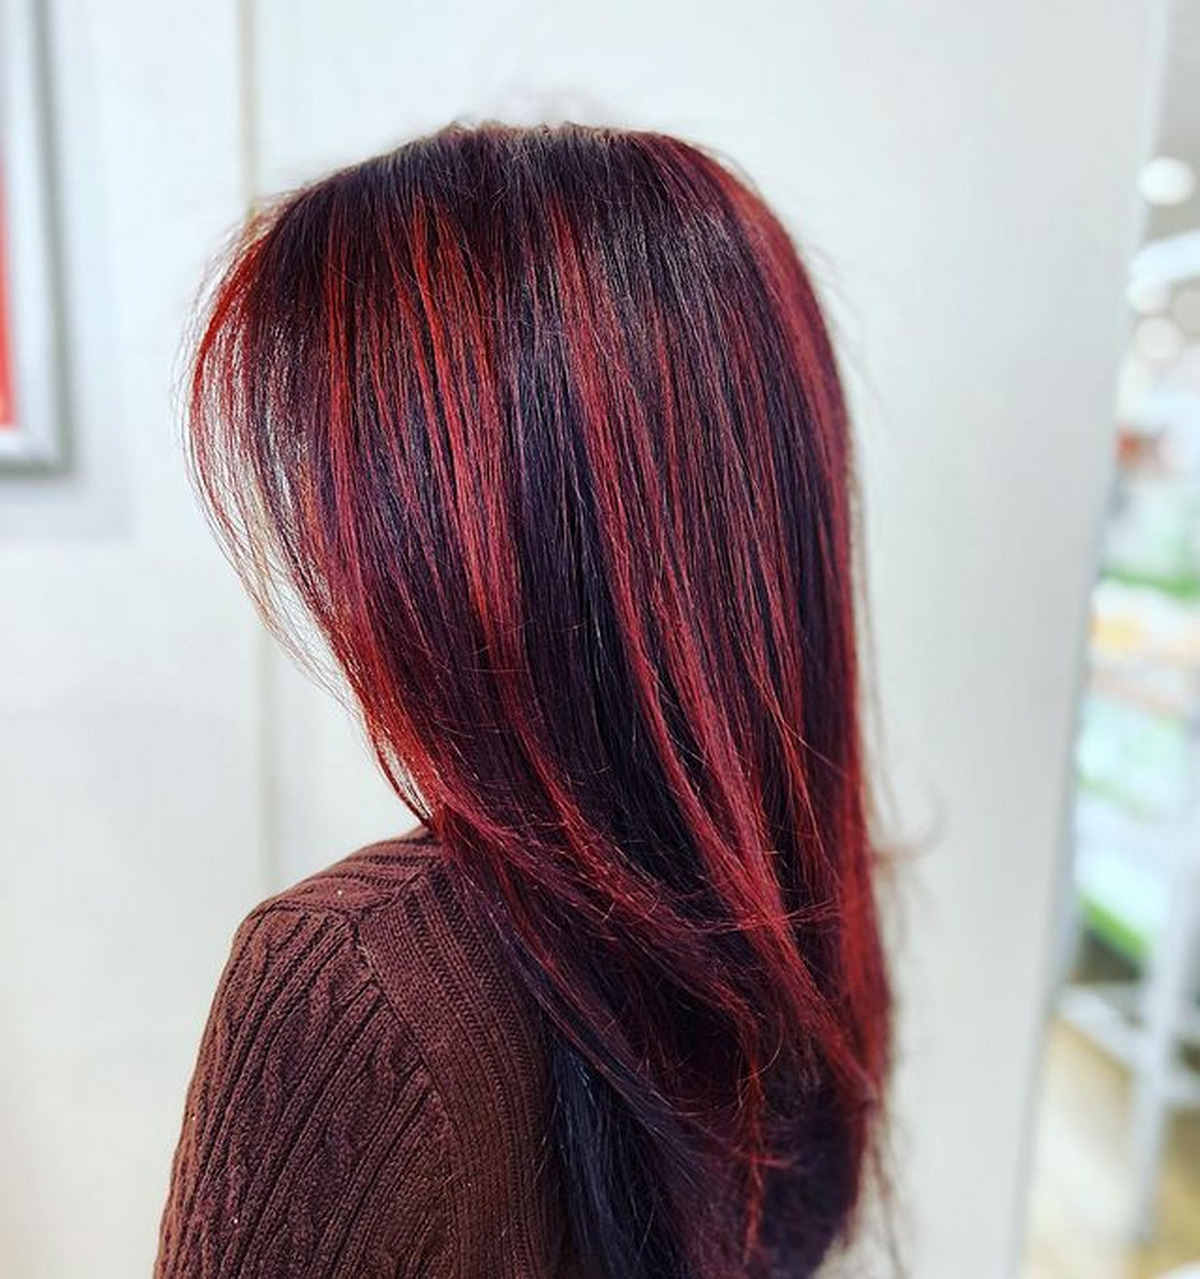 25 Awesome Black and Red Hairstyles  SloDive